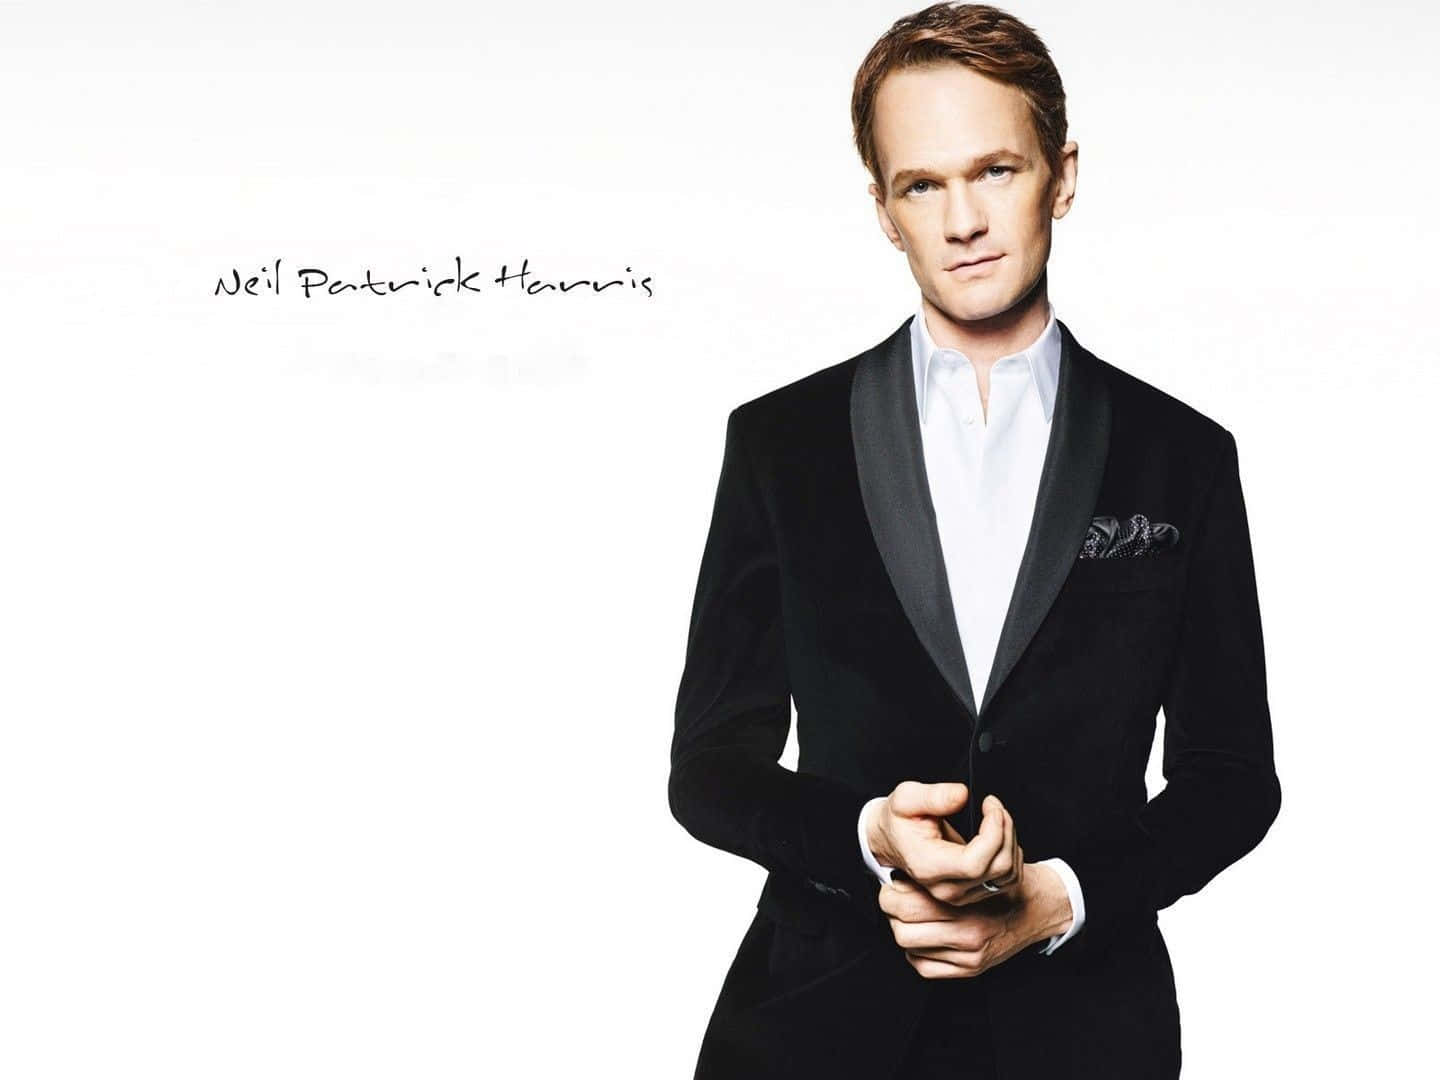 Neil Patrick Harris in a Relaxed Pose Wallpaper